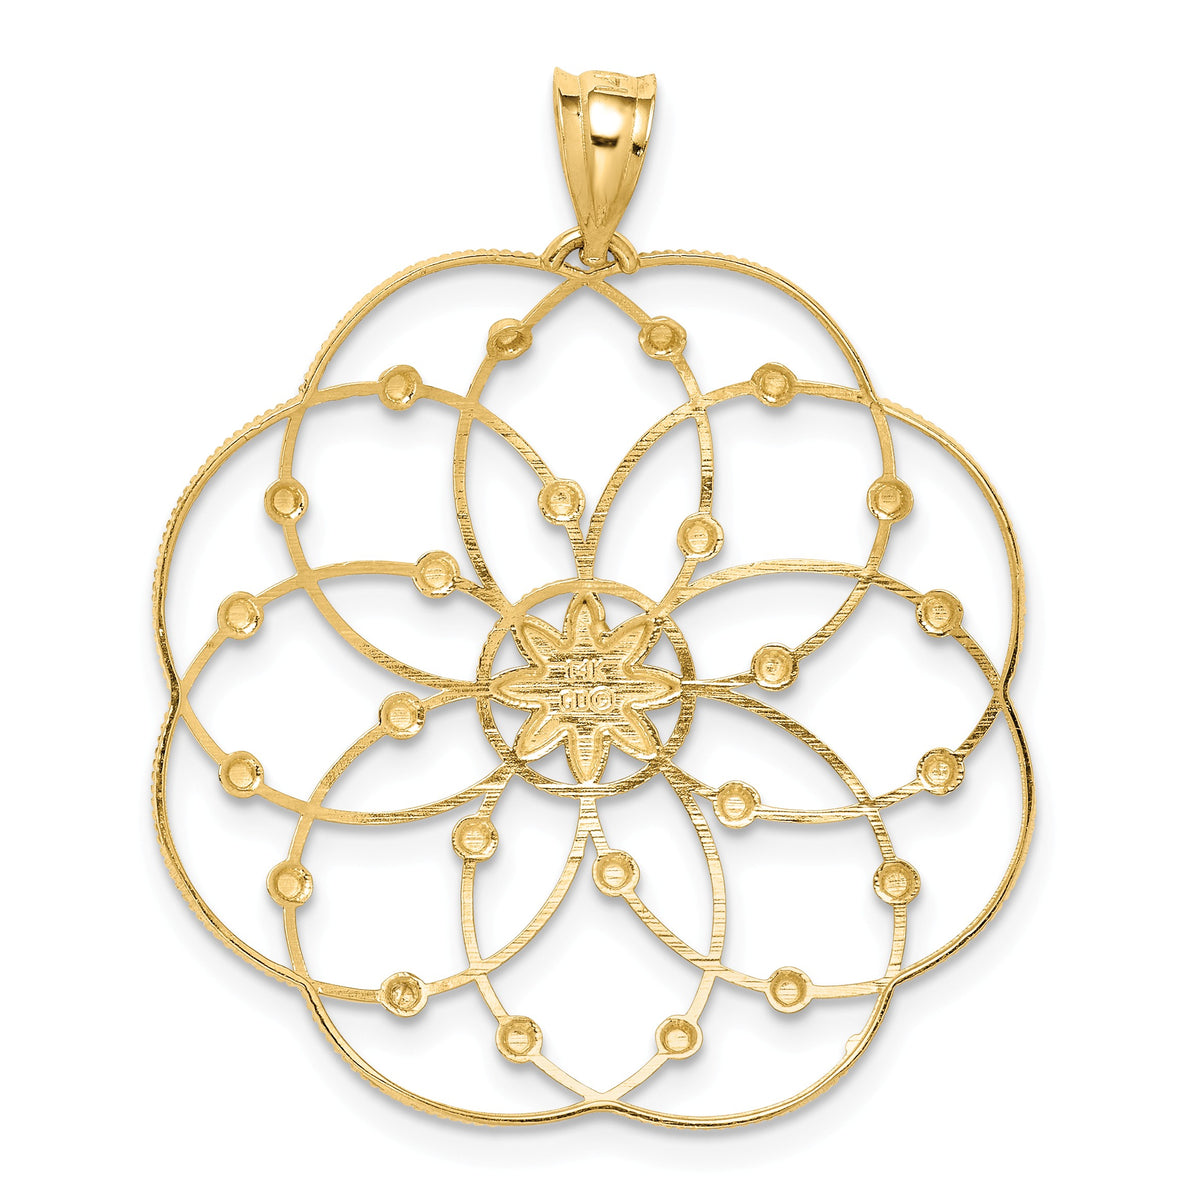 Alternate view of the 14k Yellow Gold &amp; White Rhodium Spiral Circle Pendant, 32mm (1 1/4 in) by The Black Bow Jewelry Co.